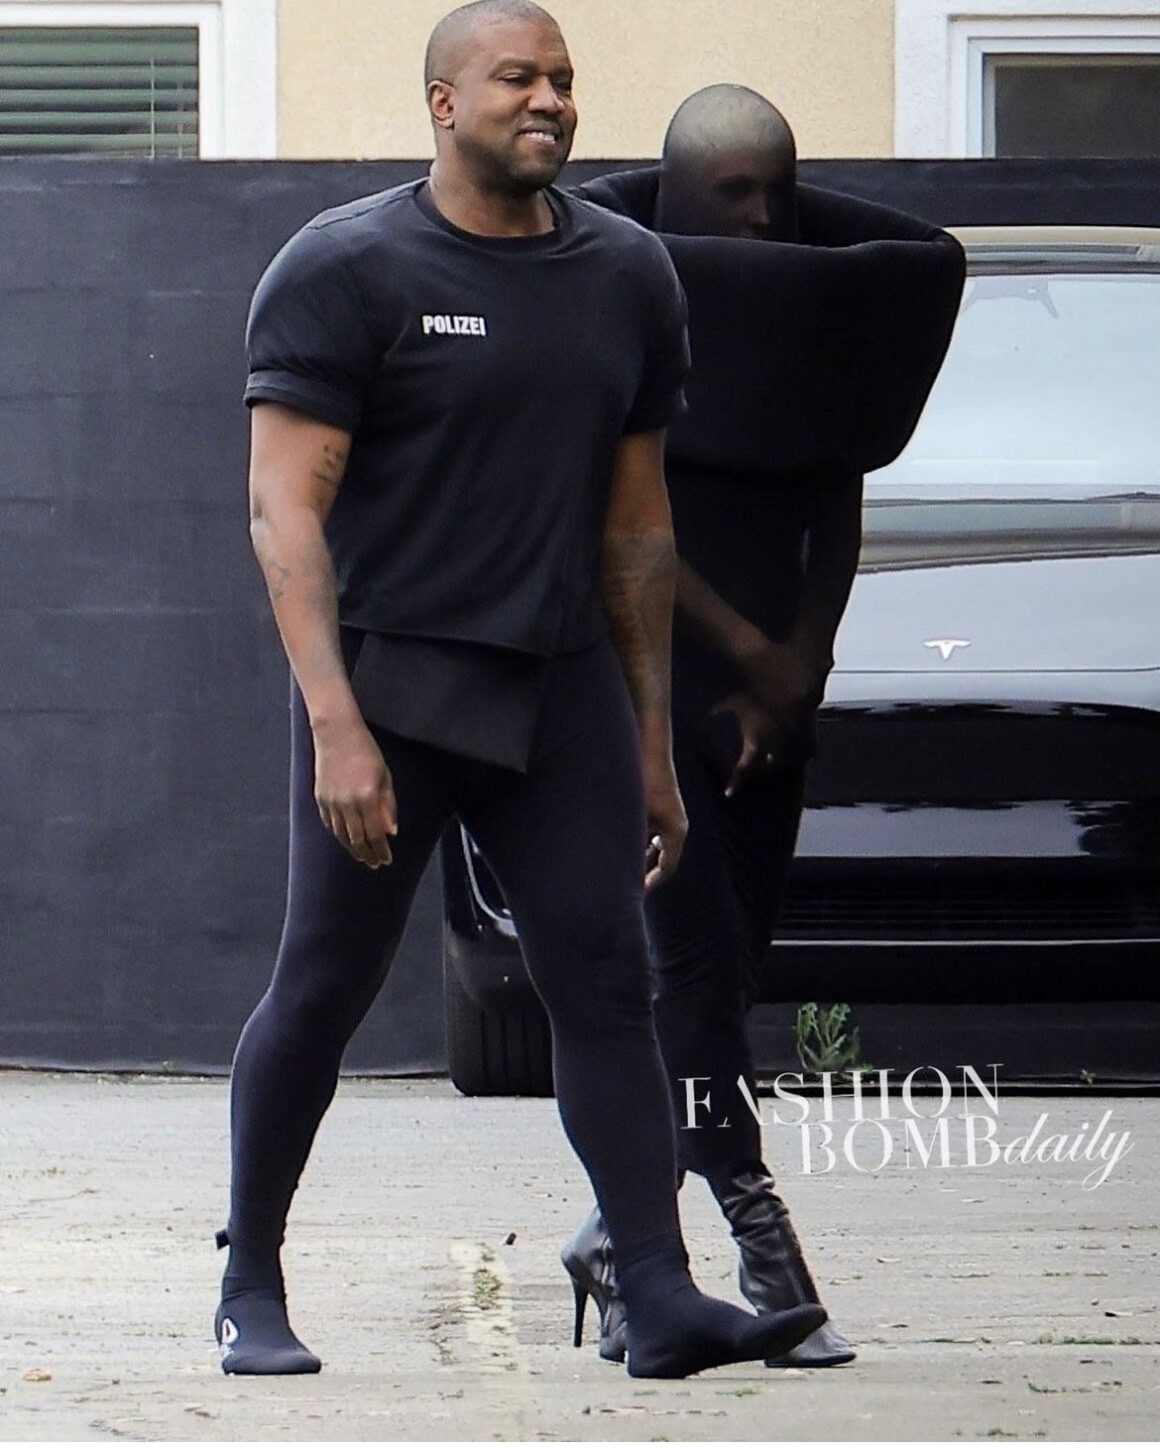 Kanye West Wore His Black Signature Vetements 'Polizei' Shirt and